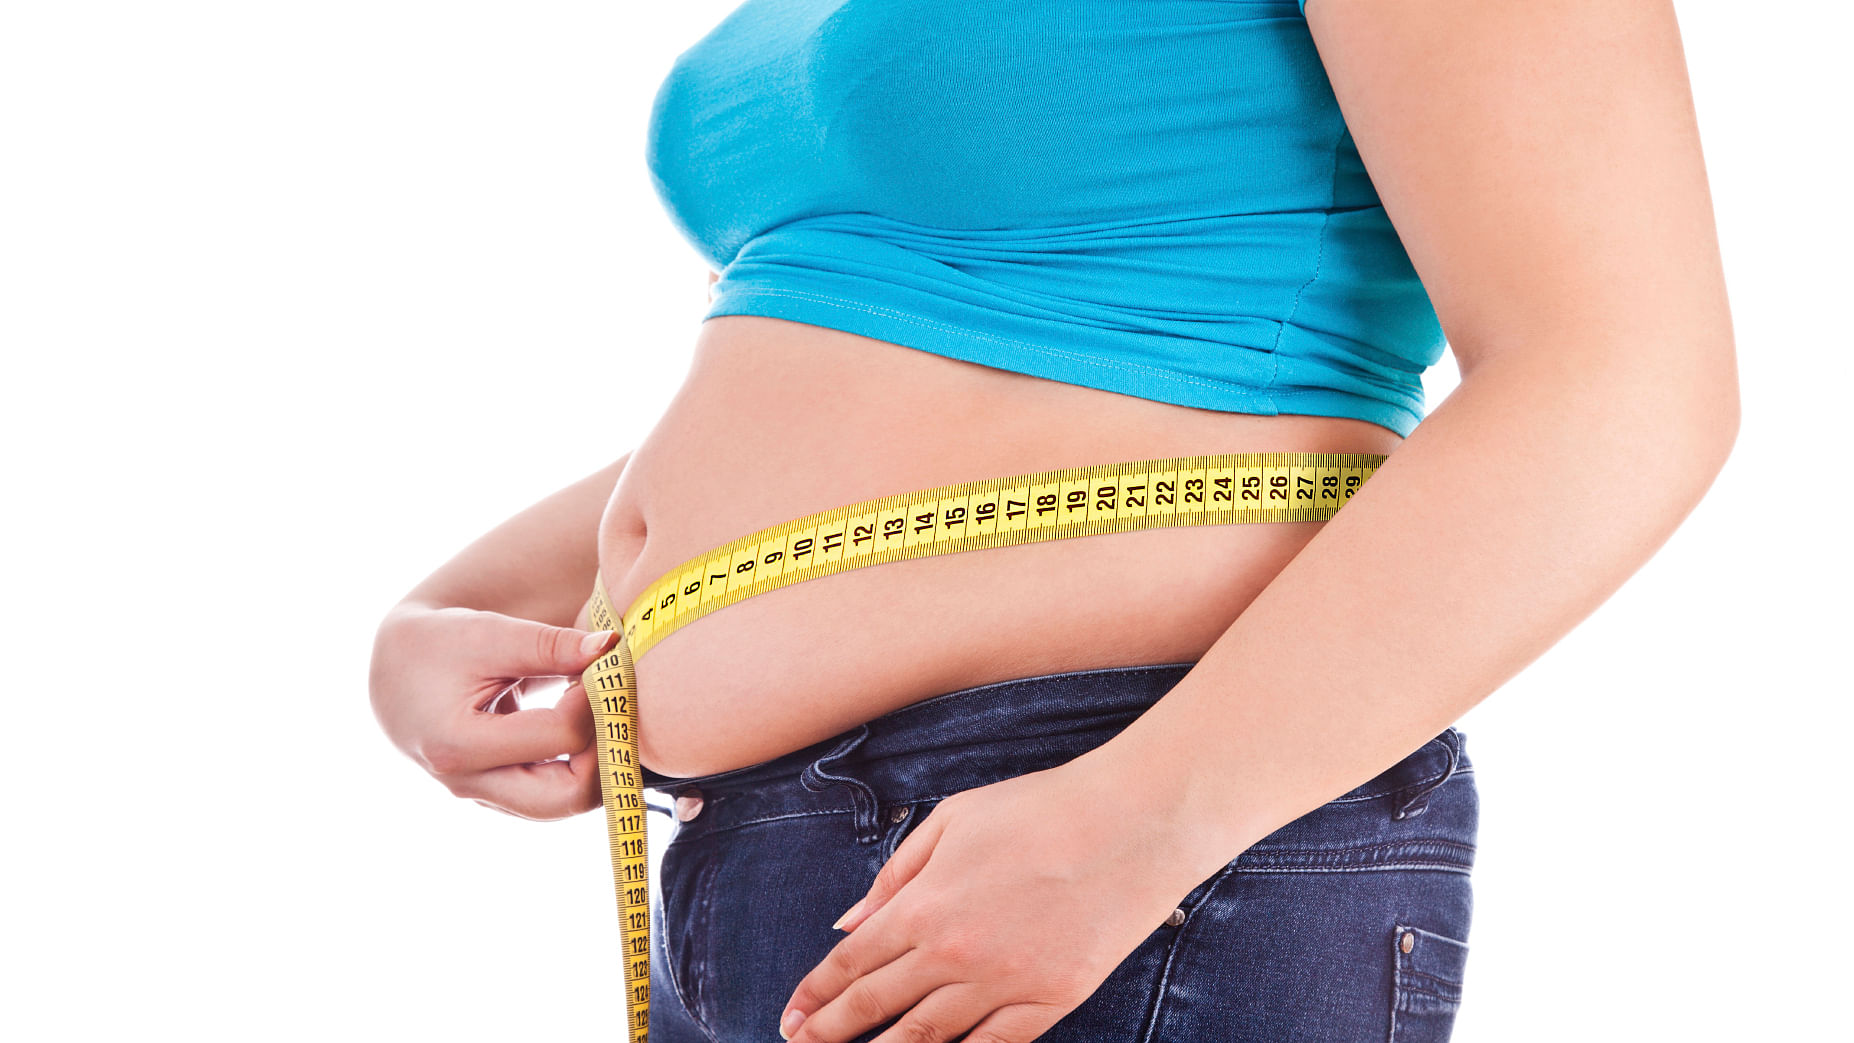 Australian health authorities have approved a new weight loss drug to help fight obesity. 